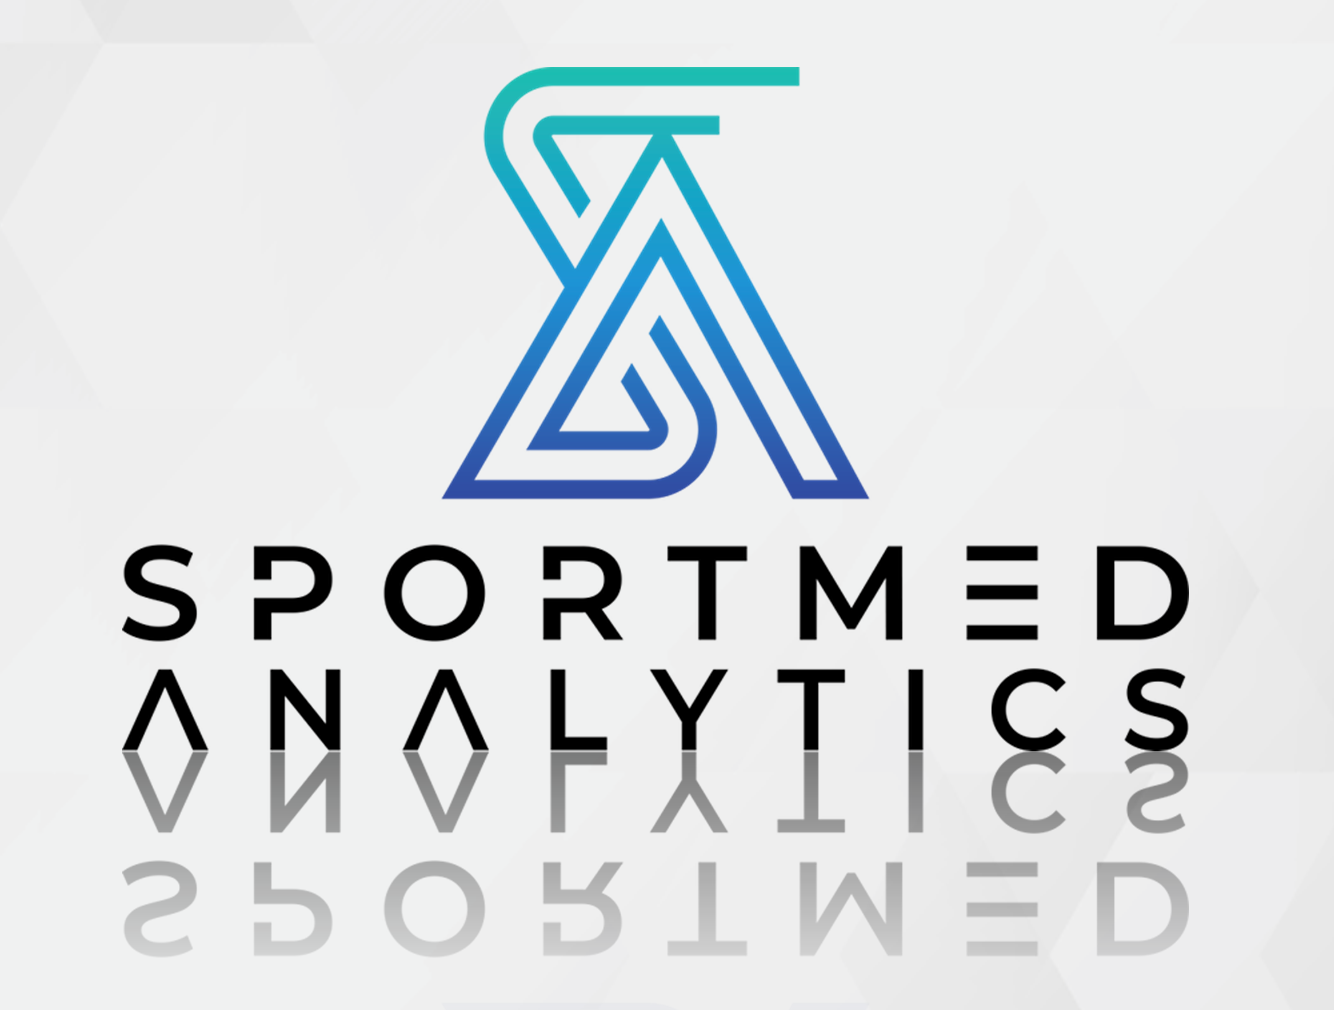 //www.datasys.at/wp-content/uploads/Sportmed.png